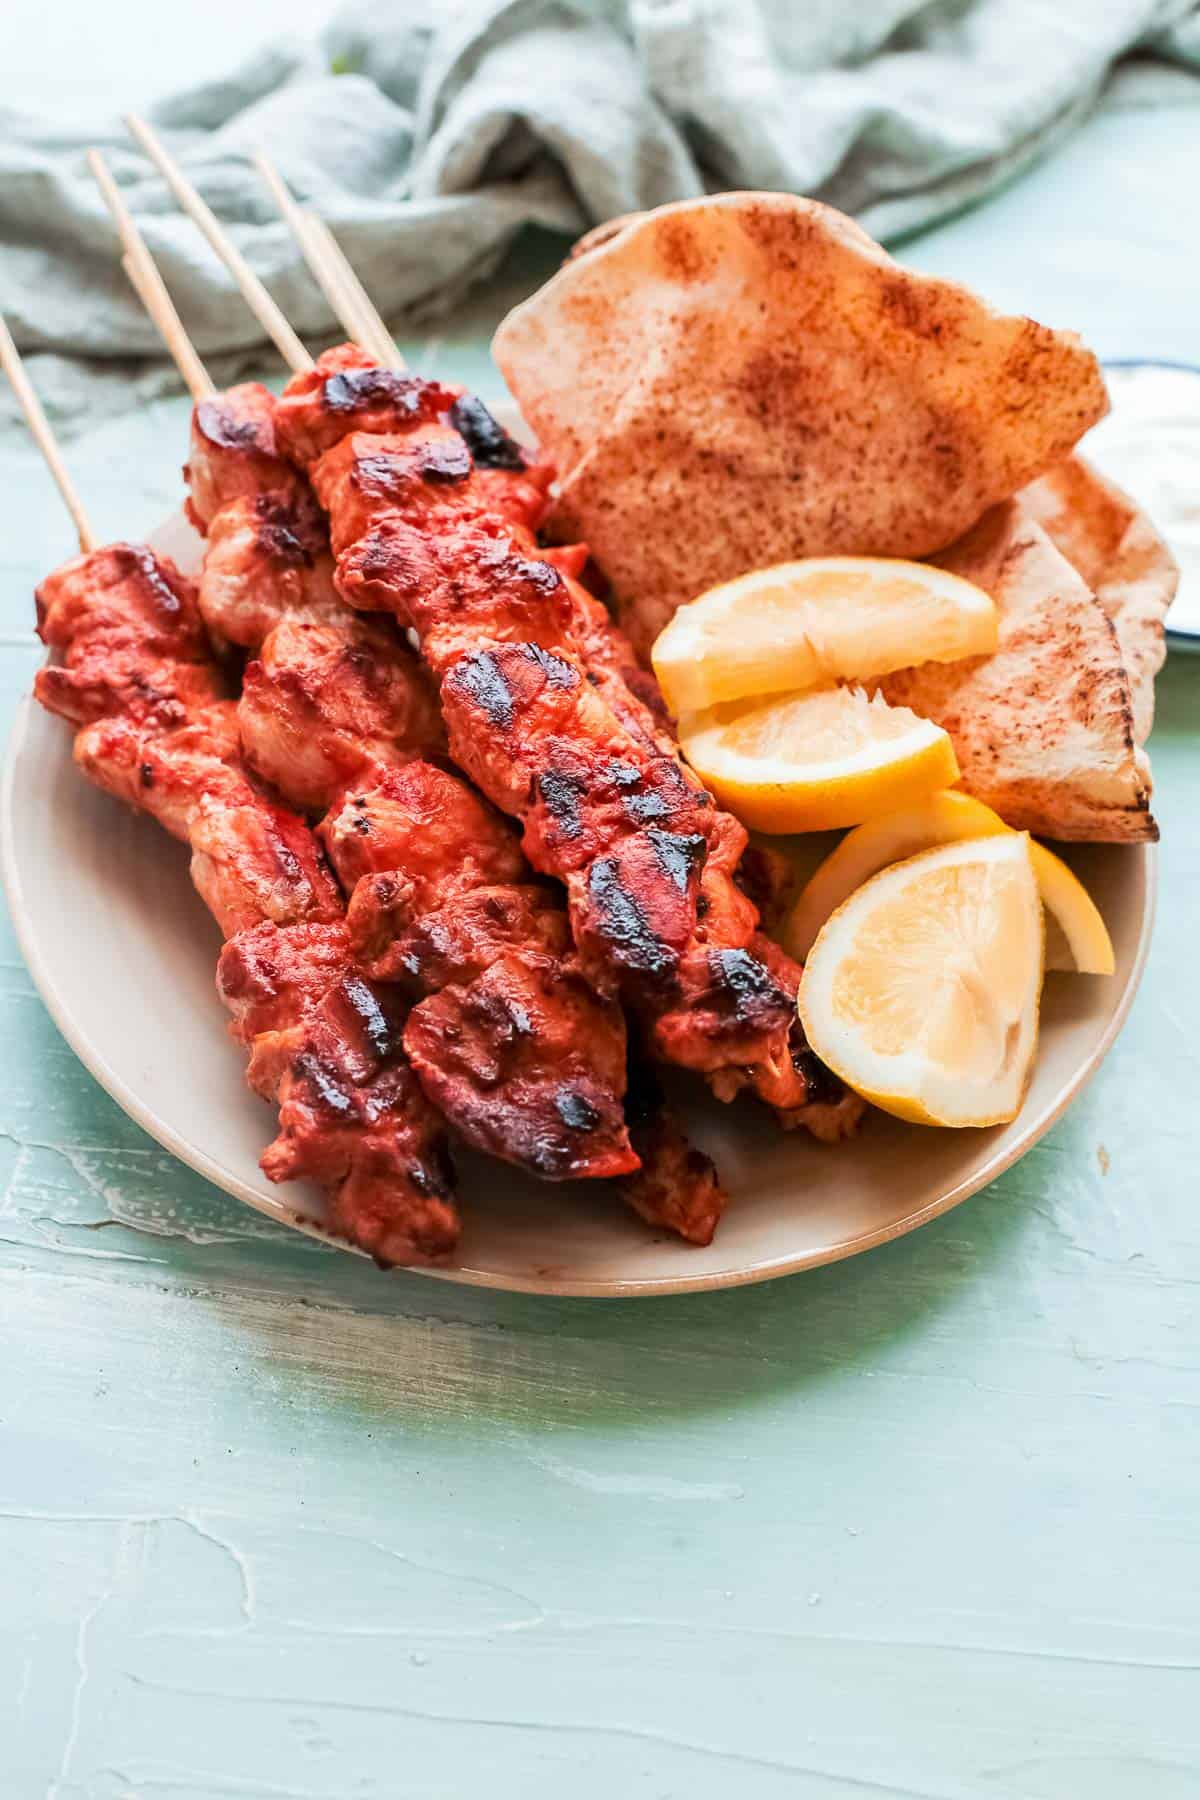 lebanese chicken skewers close up on plate with lemon wedges